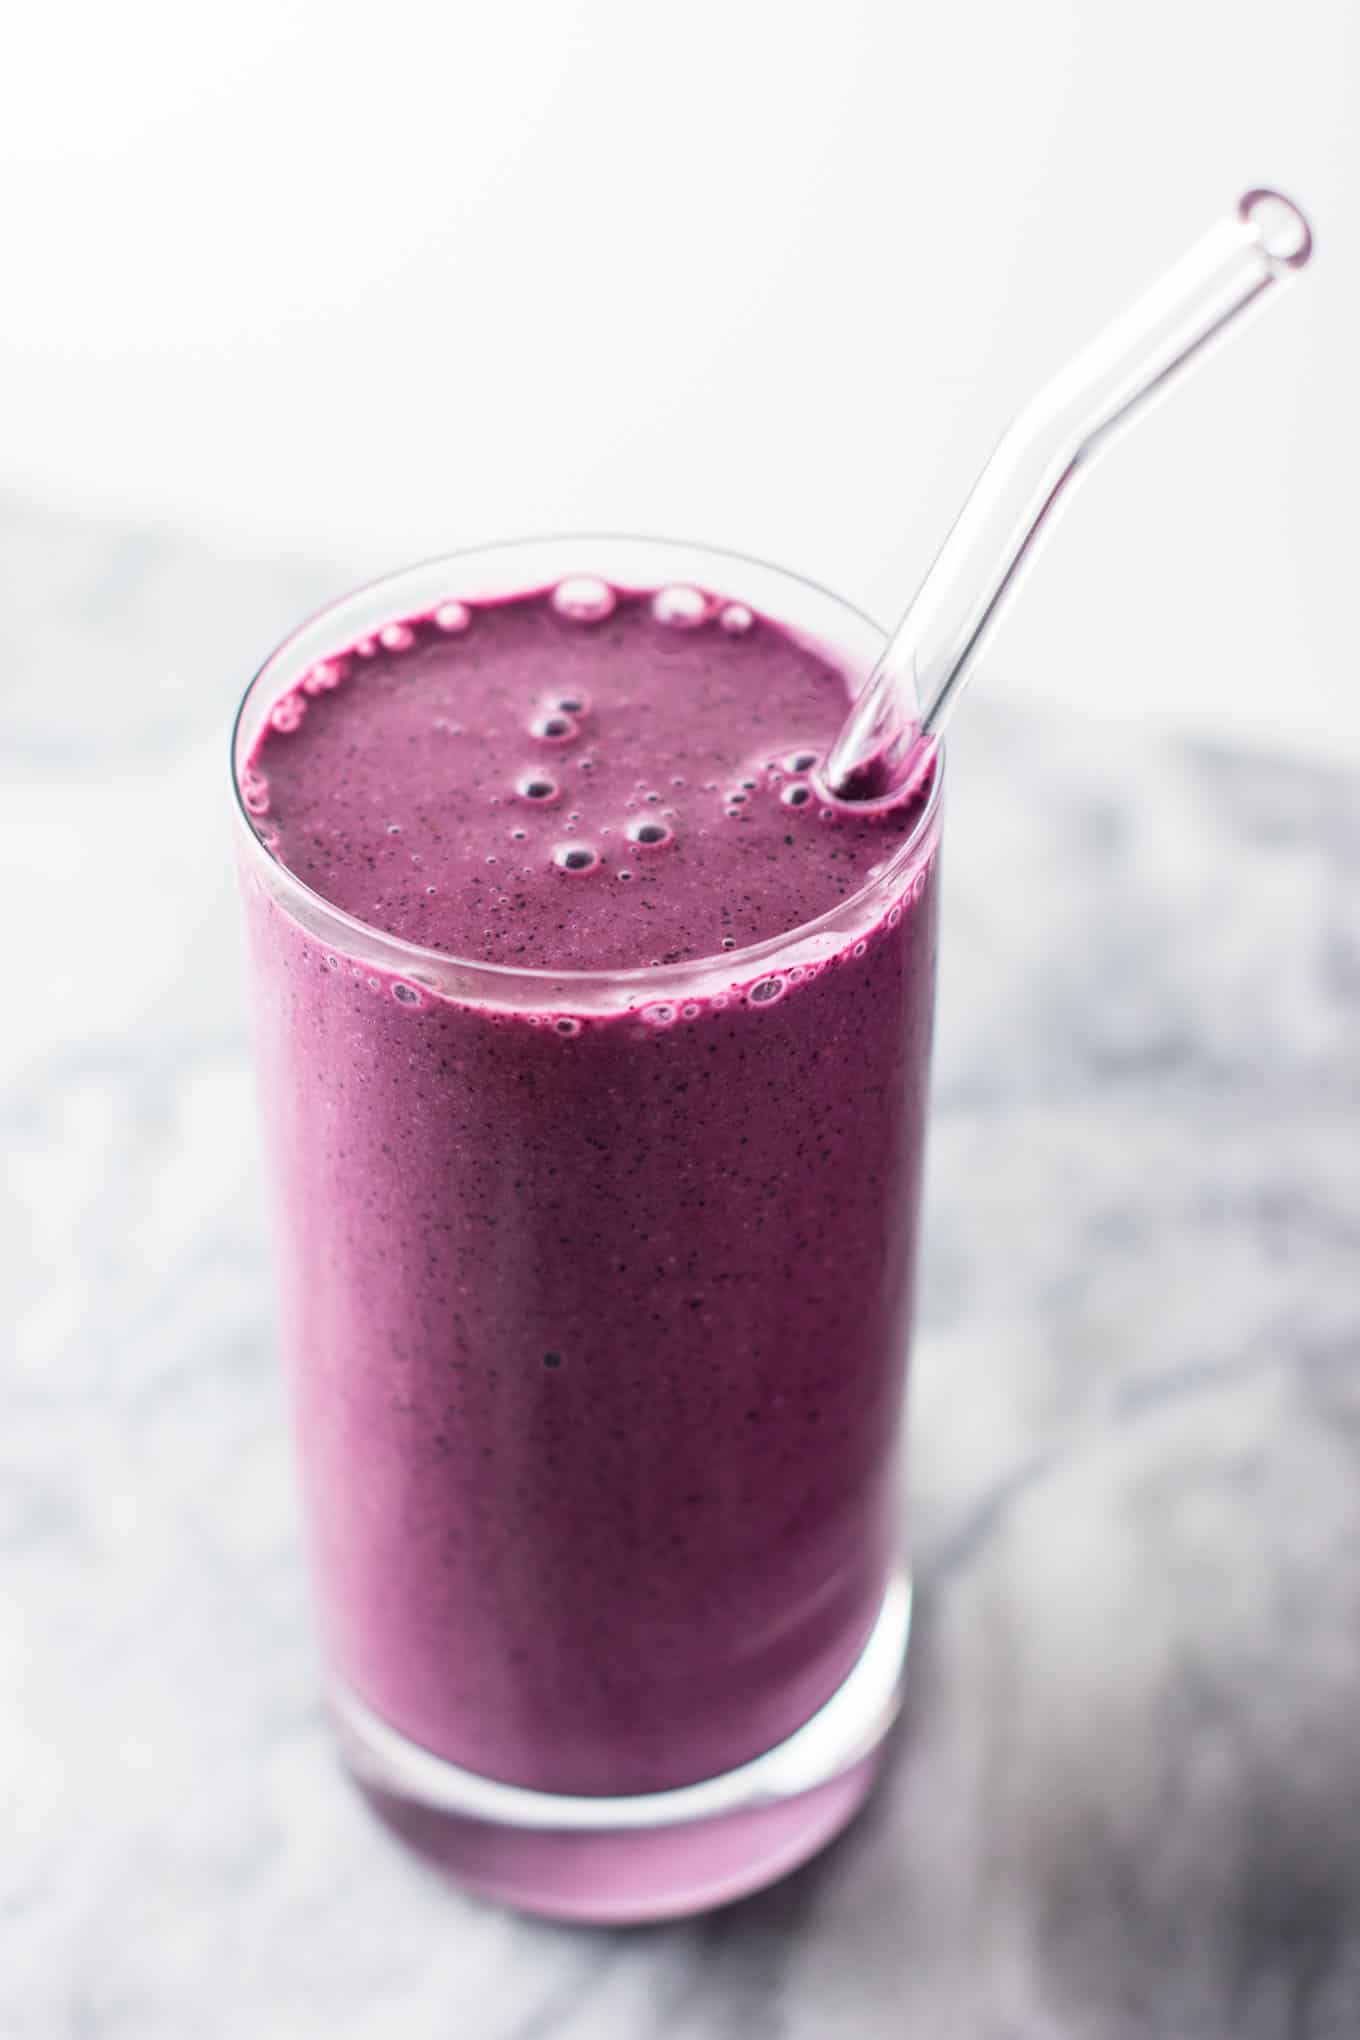 blueberry pie smoothie in a glass with a glass straw